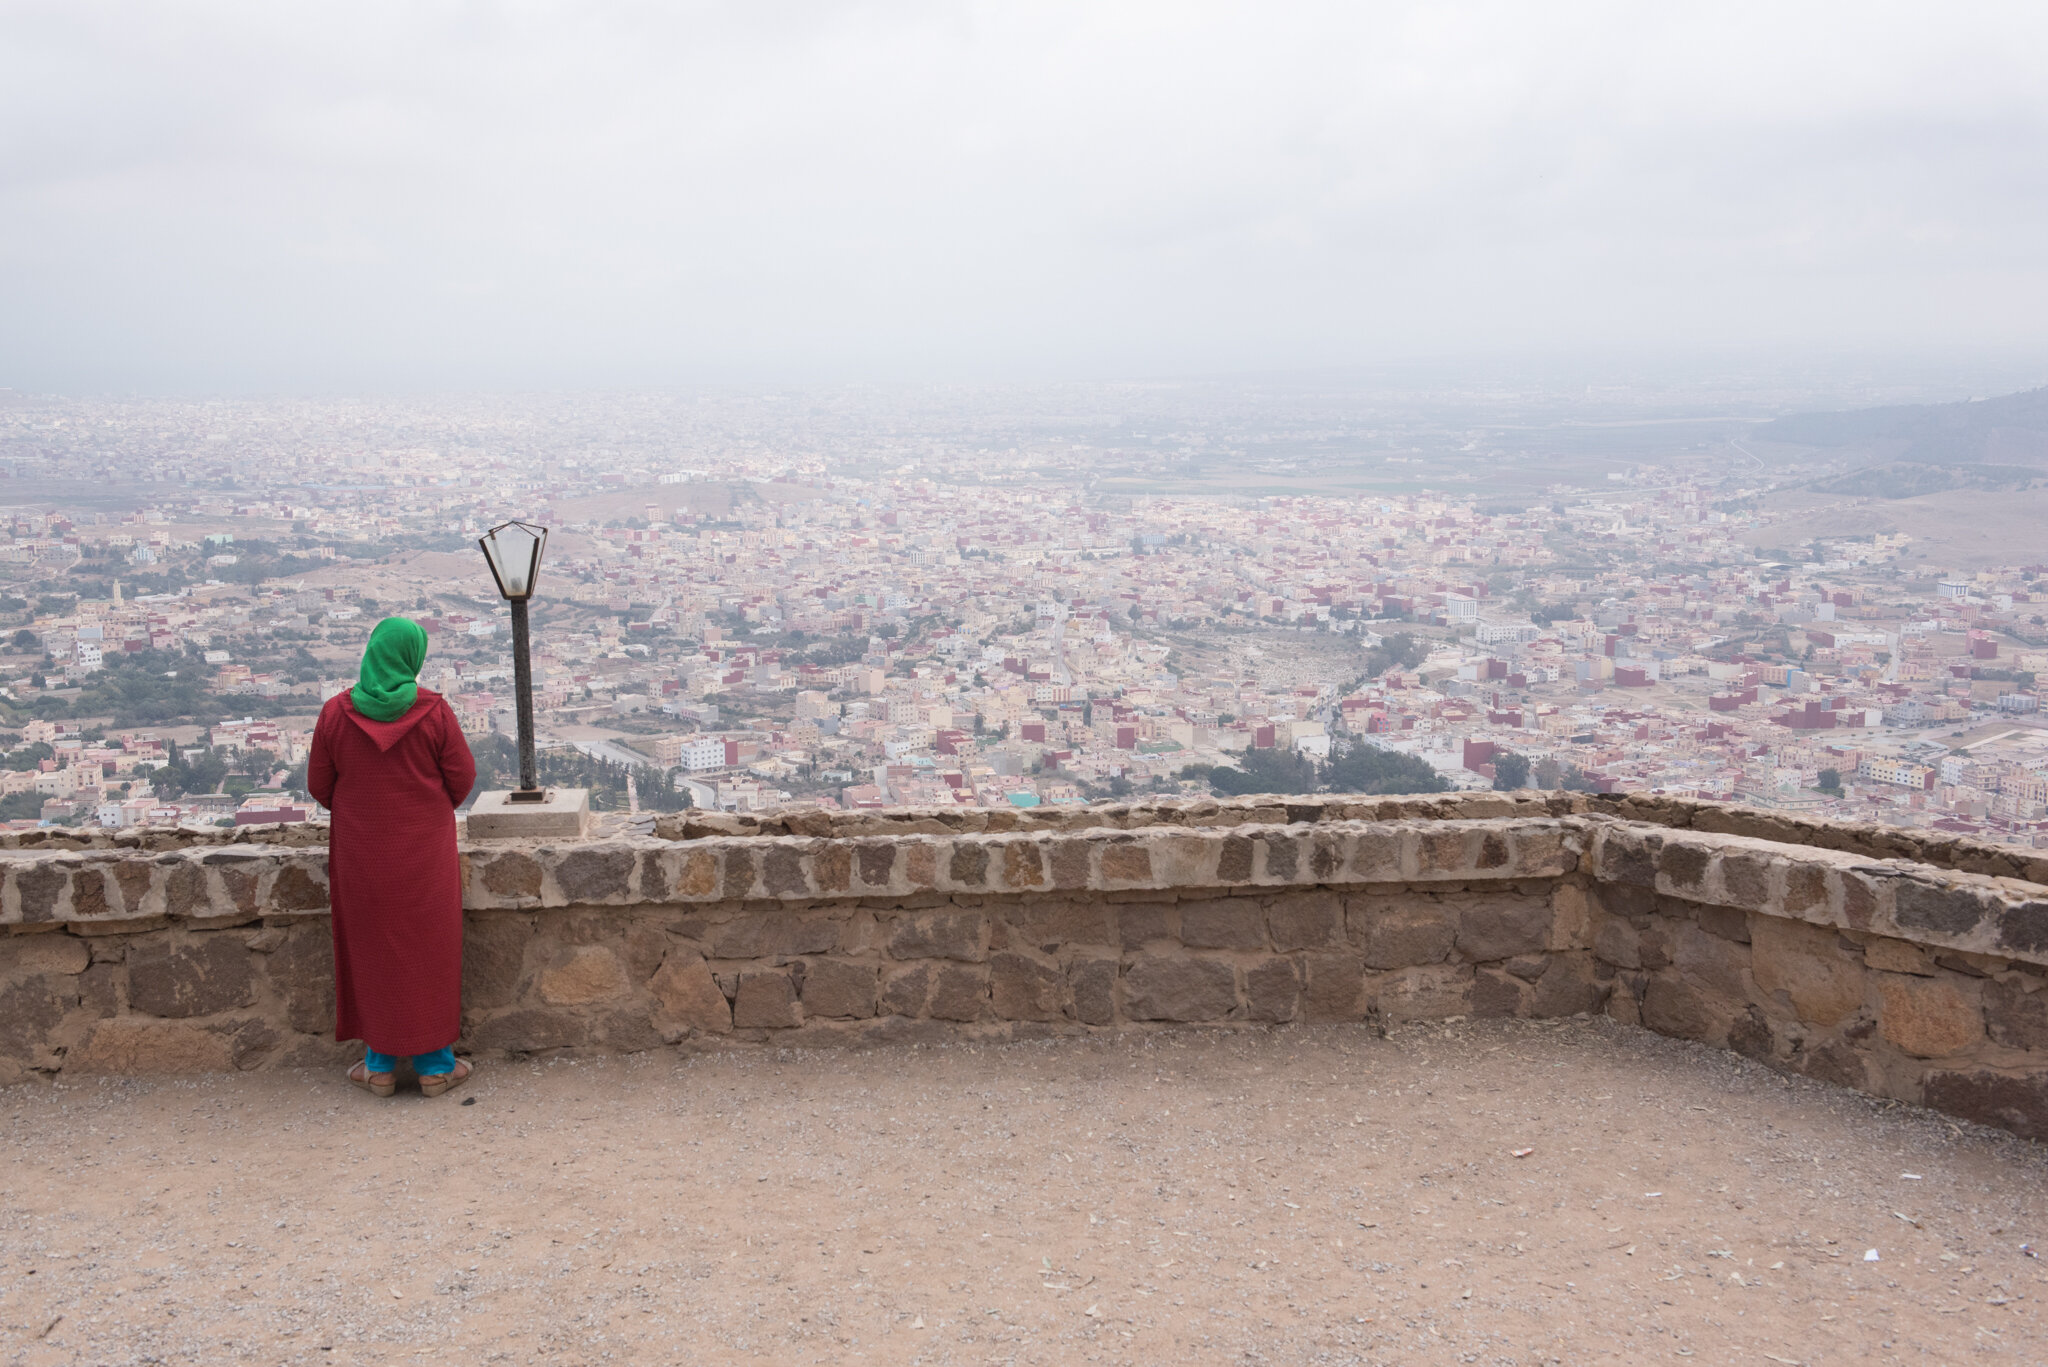    Morocco - Nador     Moroccan lady looking out towards Nador from nearby mountains 